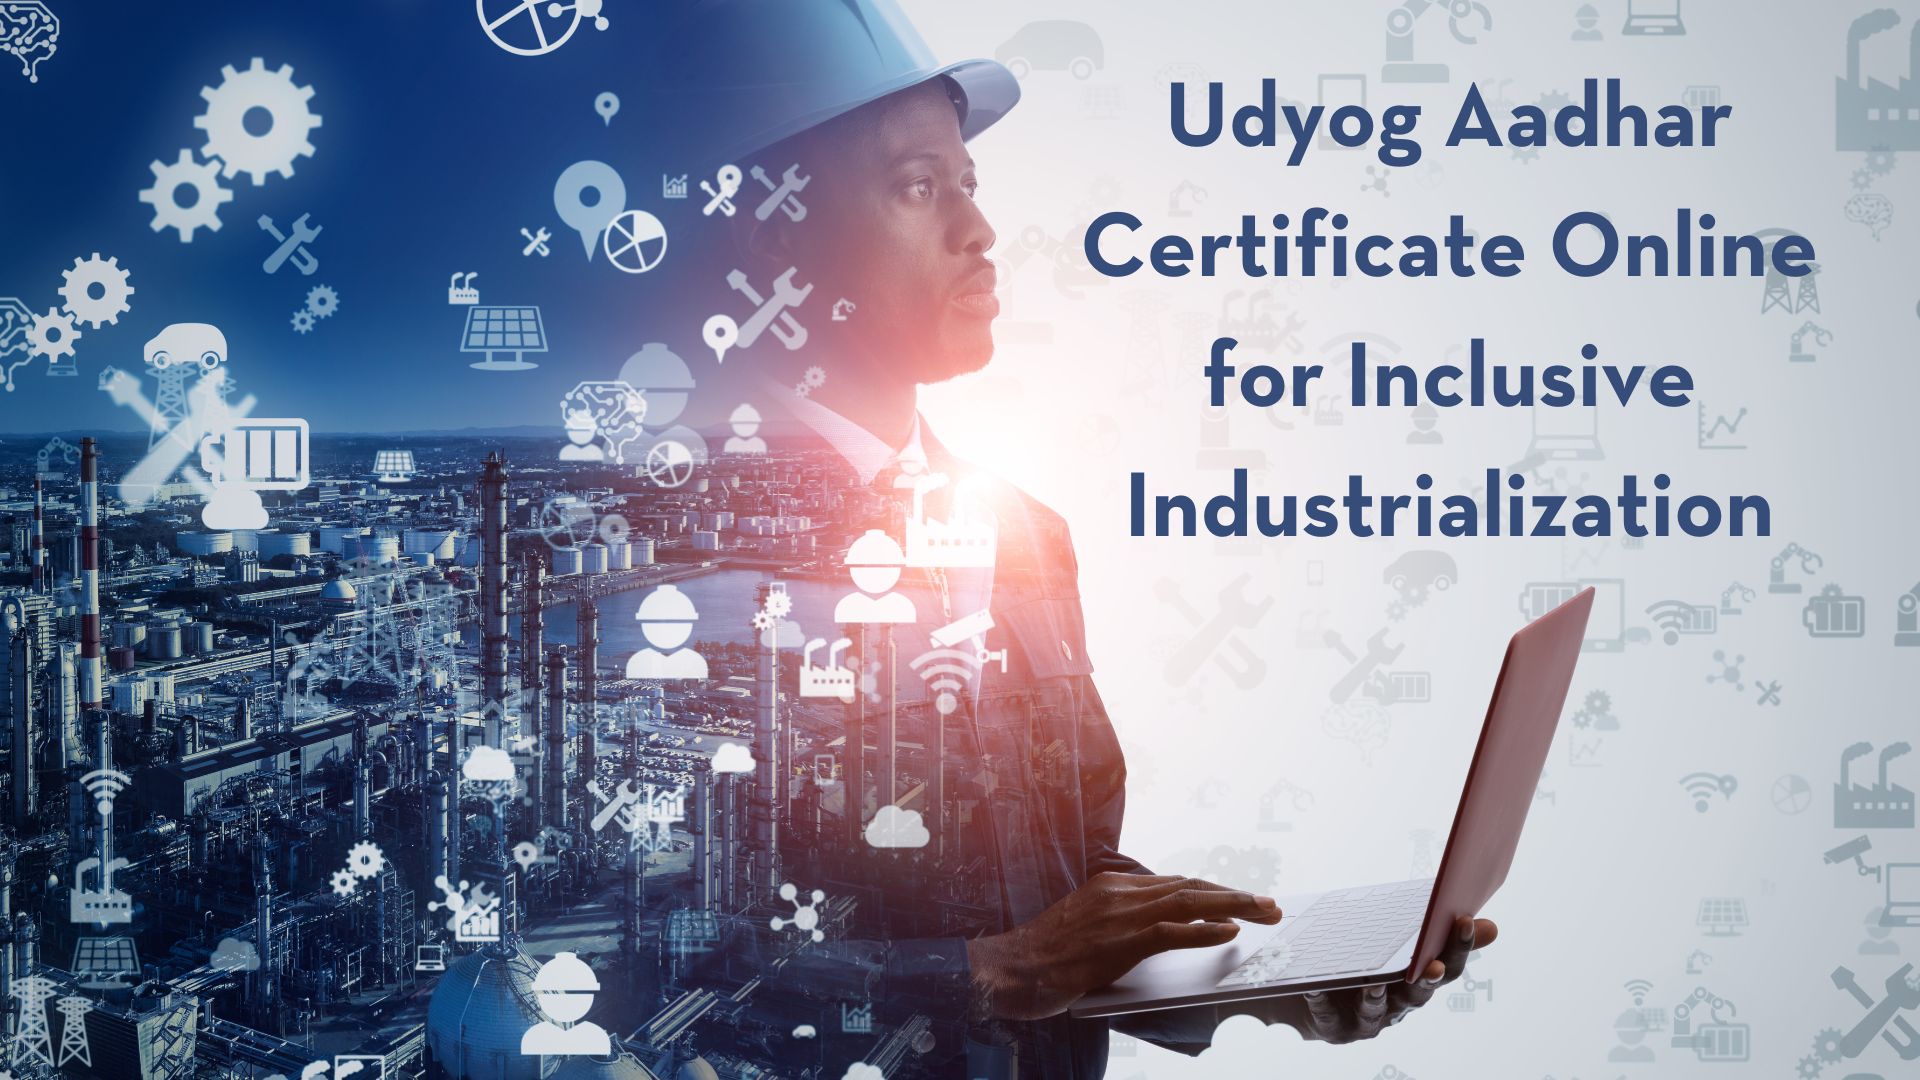 Udyog Aadhar Certificate Online for Inclusive Industrialization